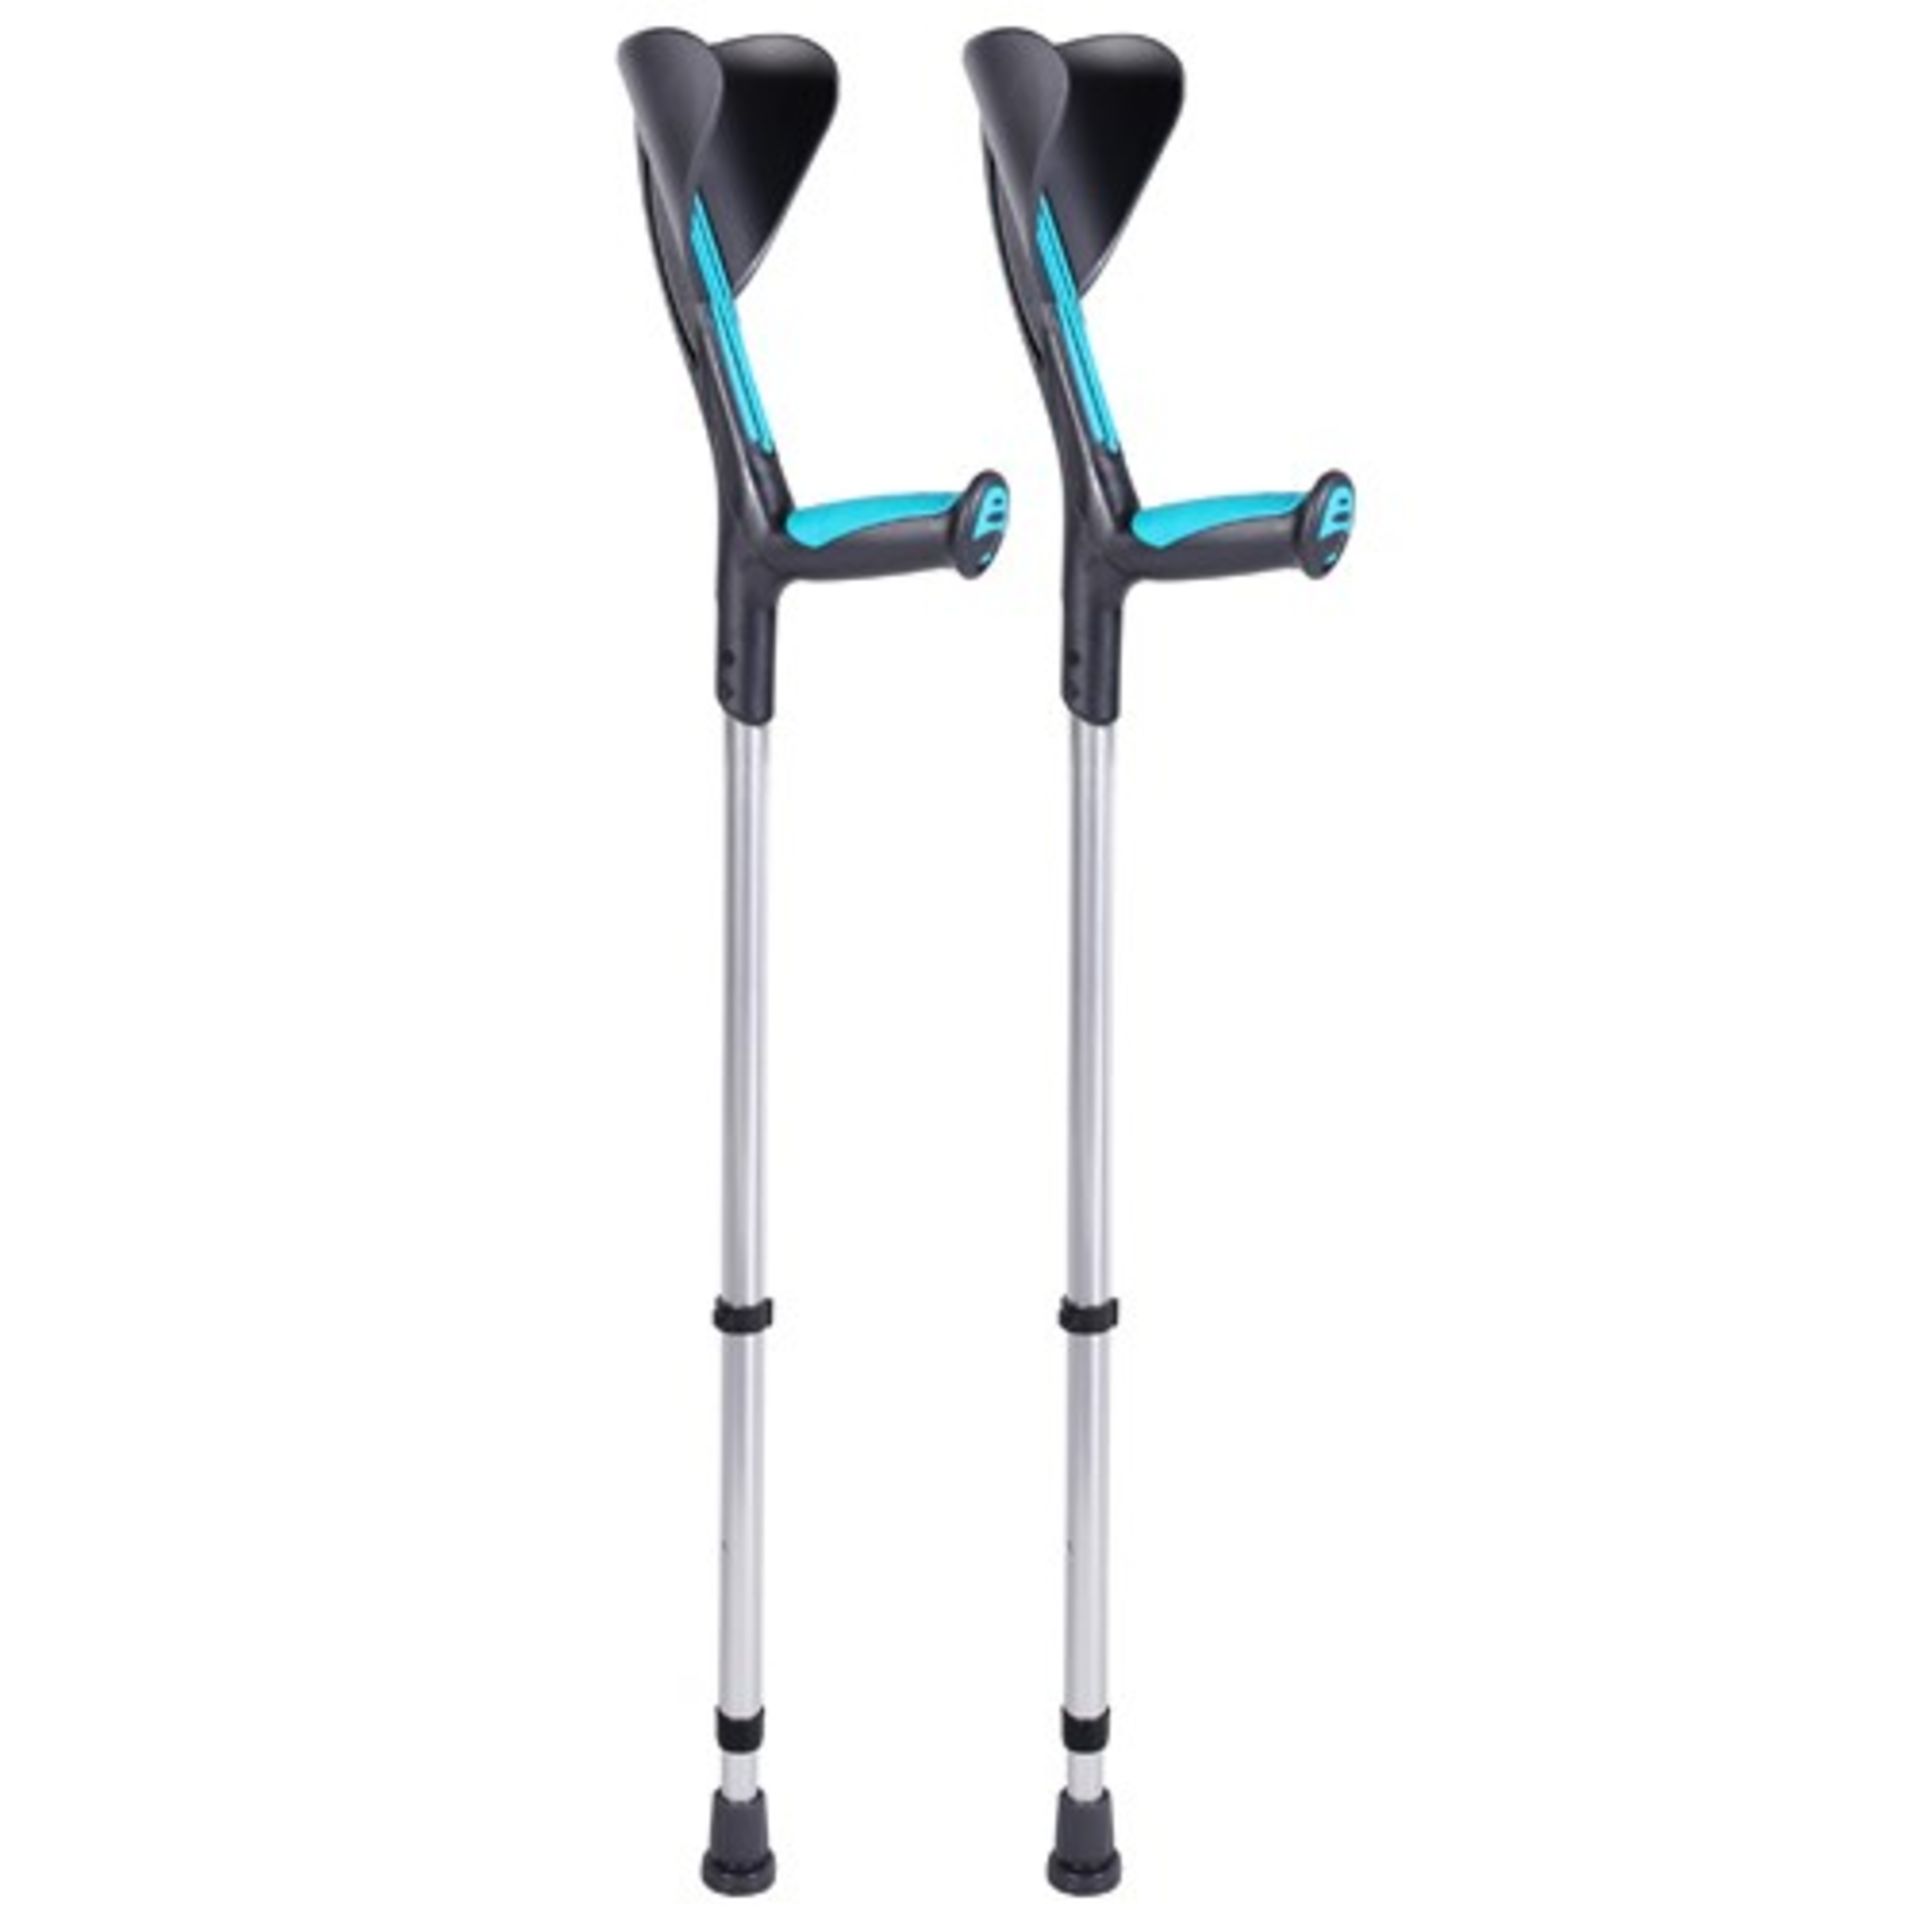 ME : 1 AS NEW BAGGED PAIR OF ADVANCED ALUMINIUM FRAME ELBOW CRUTCHES - TURQUOISE / RRP £18.99 (